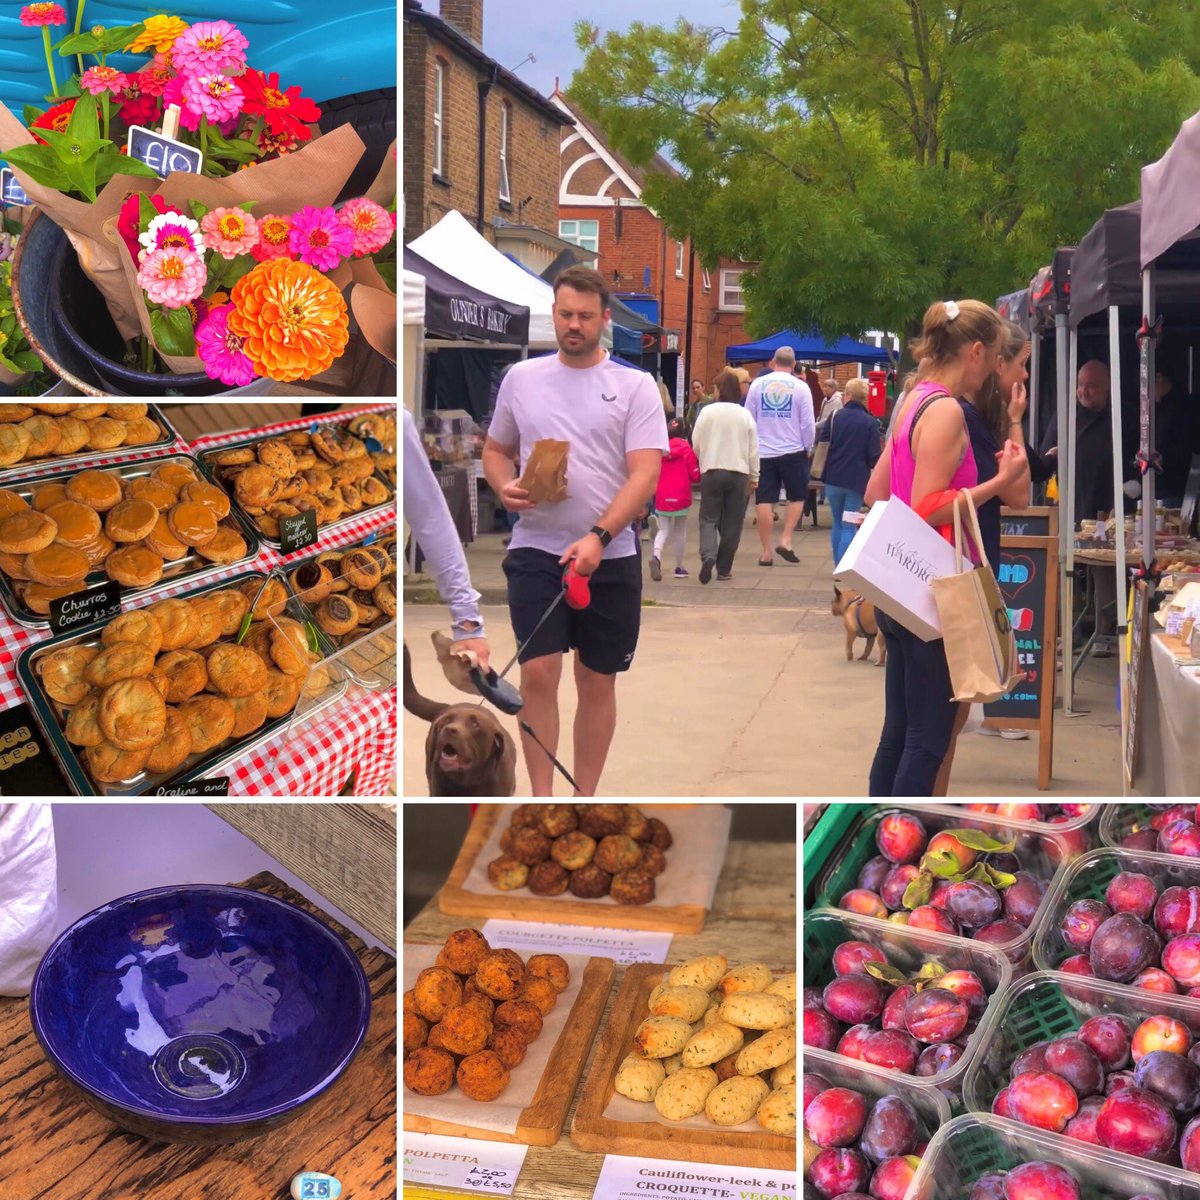 A massive thank you to everyone who came along and supported our local producers in #cobham today. We look forward to seeing you again at the next Farmers’ & Artisans Market on Saturday 26th August 💚
#surrey #farmersmarket #ThankYou #surreyfamilies